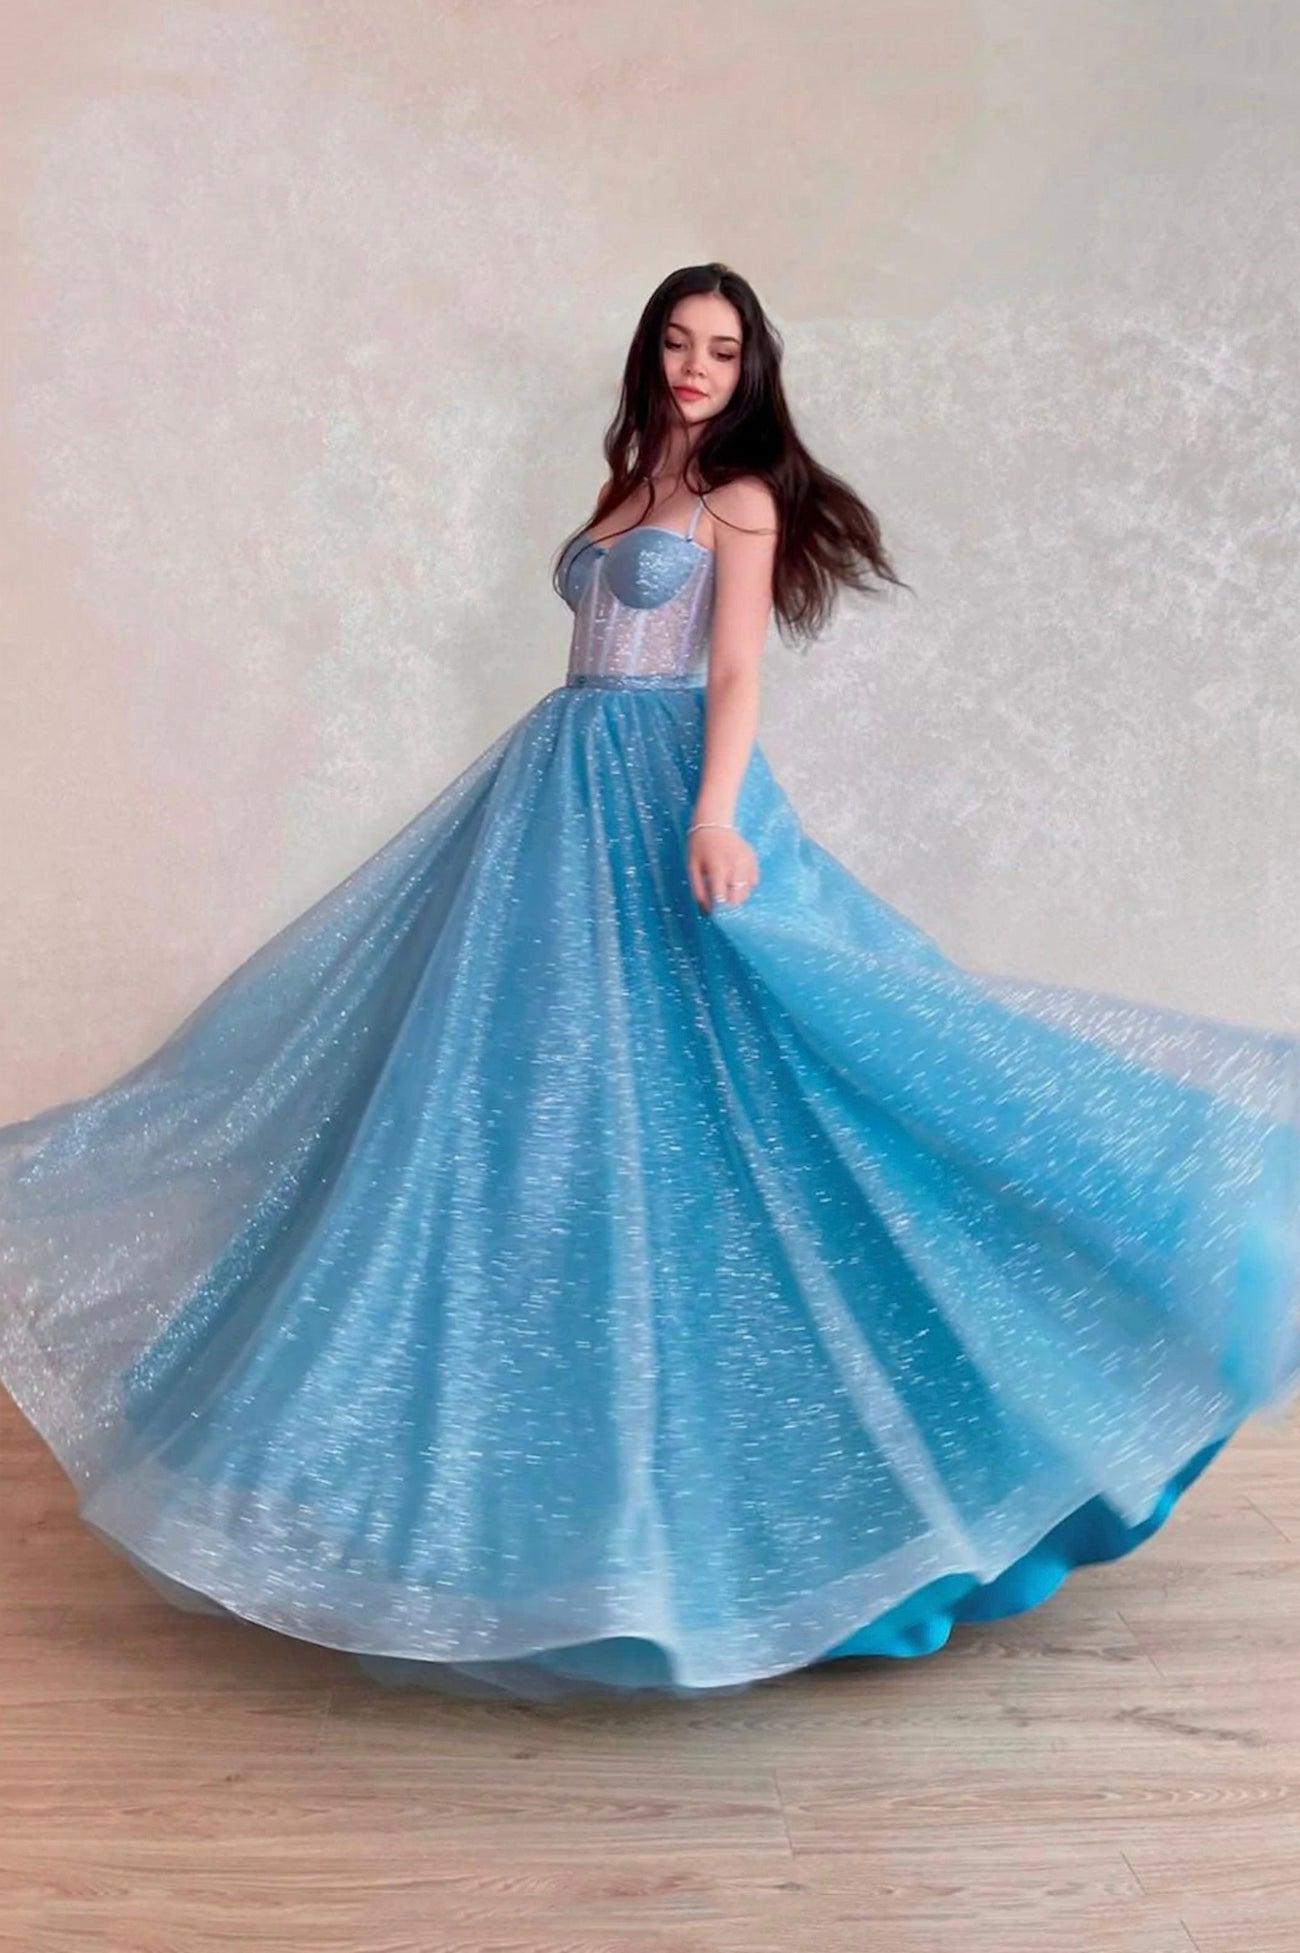 Mavis | Blue Tulle Long A-Line Prom Dress, Blue Lace-Up Evening Dress with Corset